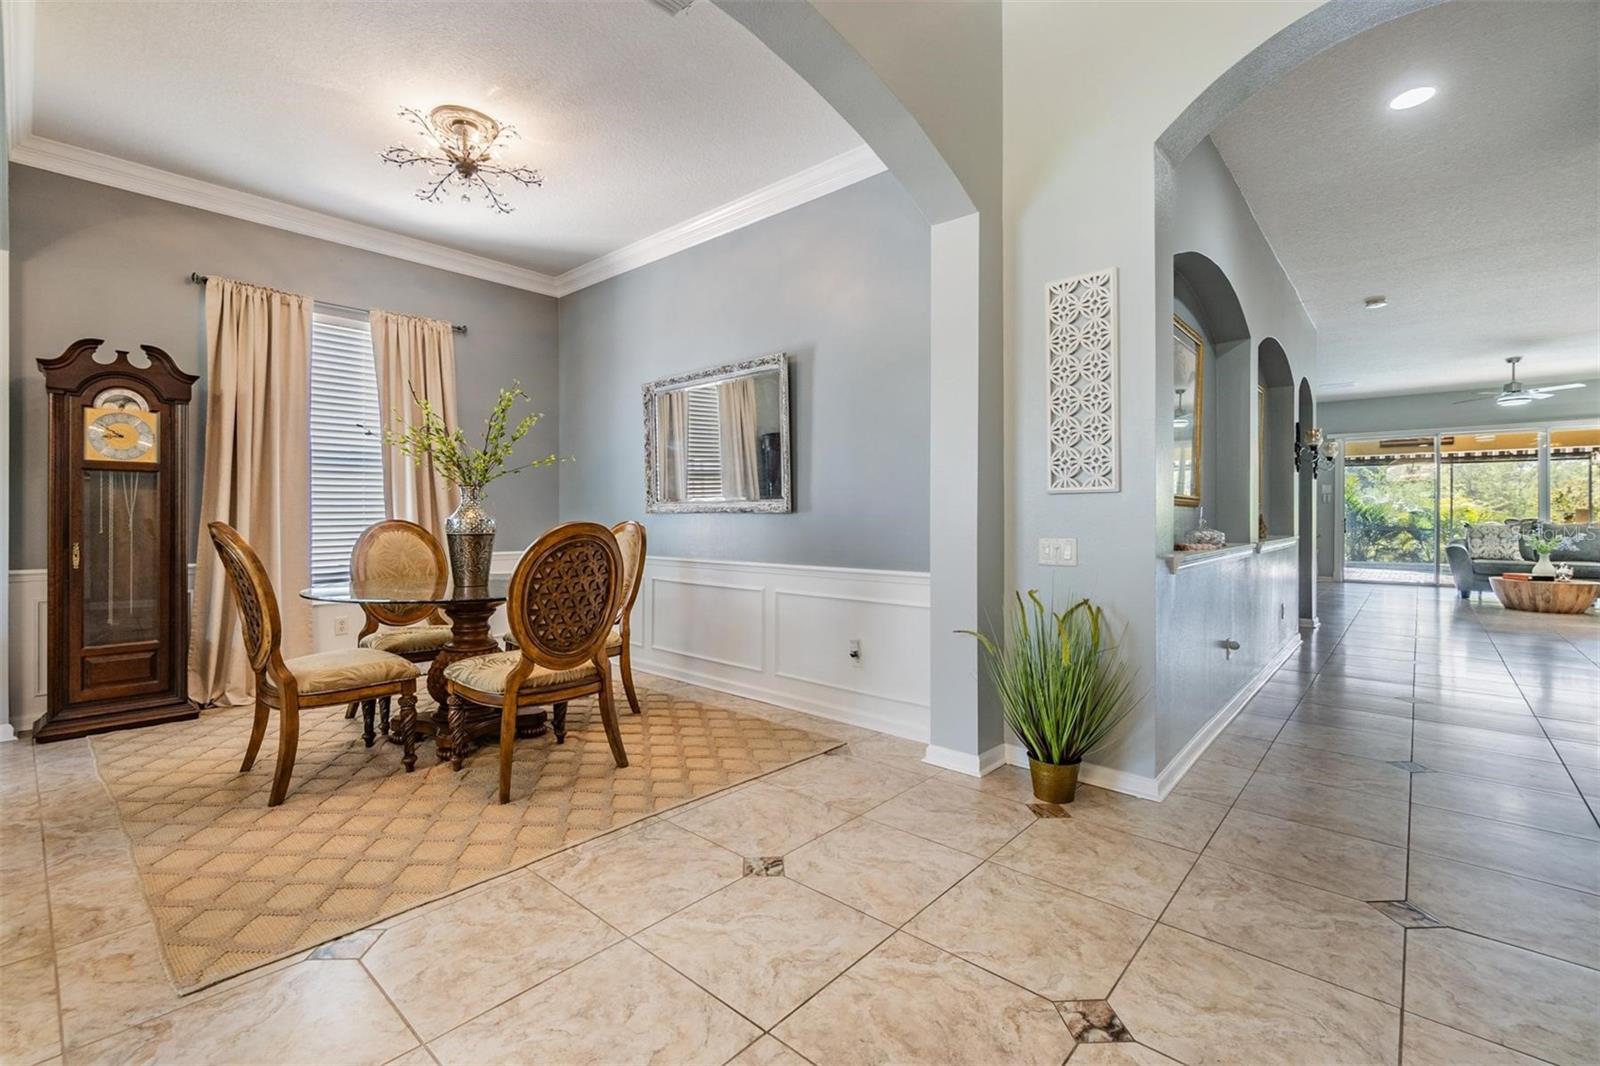 Formal Living Room, crown molding and tile flooring